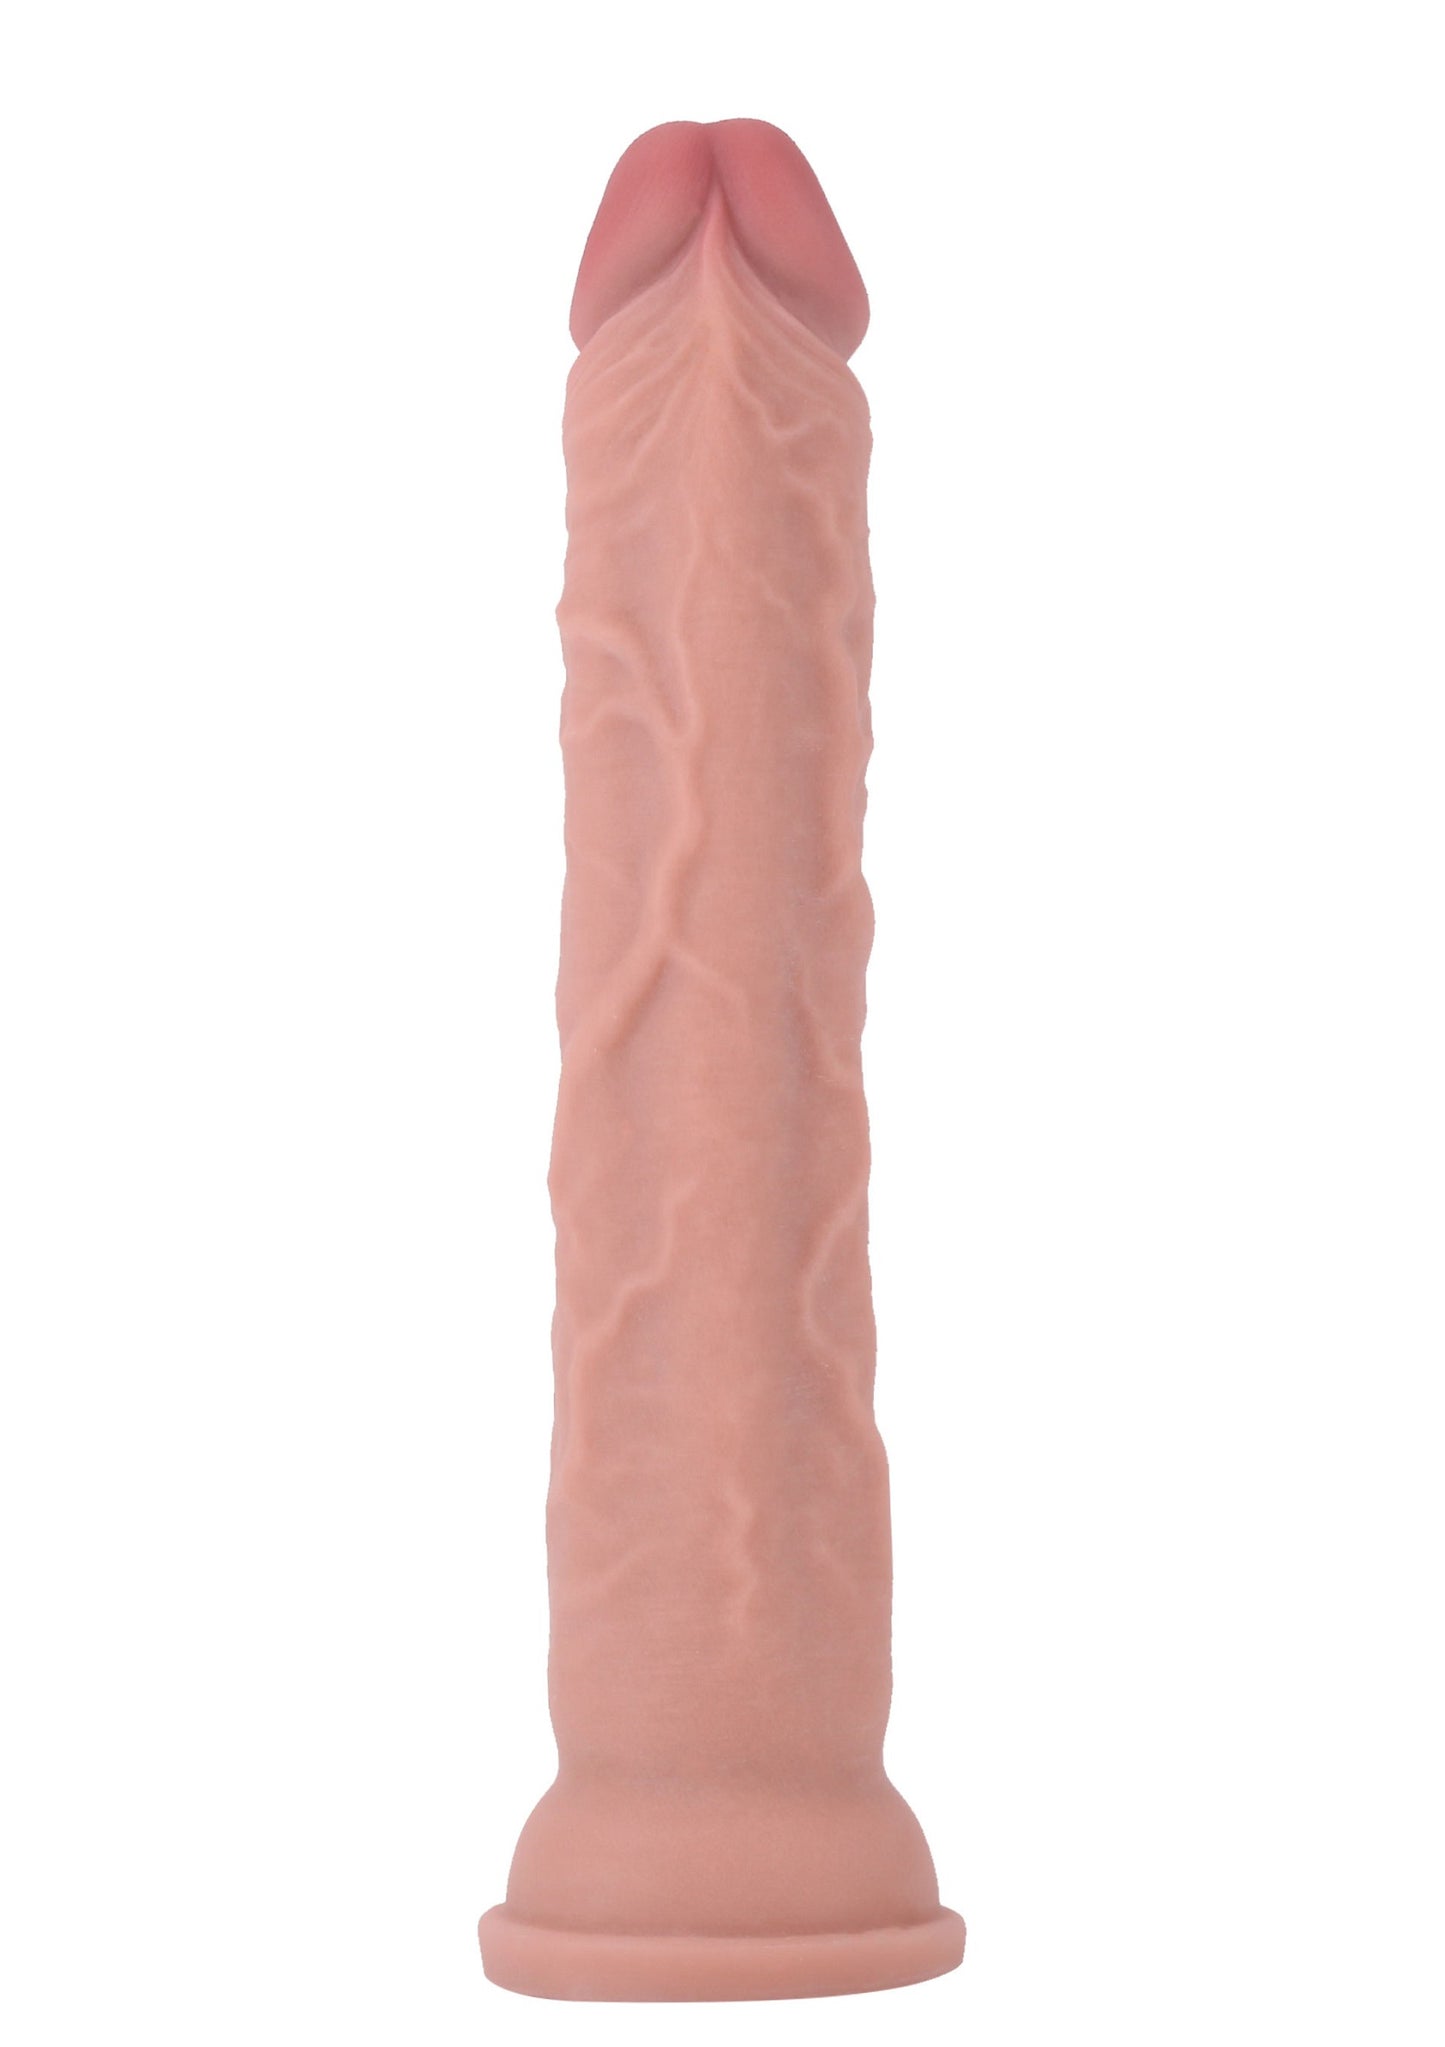 ToyJoy Get Real Deluxe Dual Density Dong 11' SKIN - 4